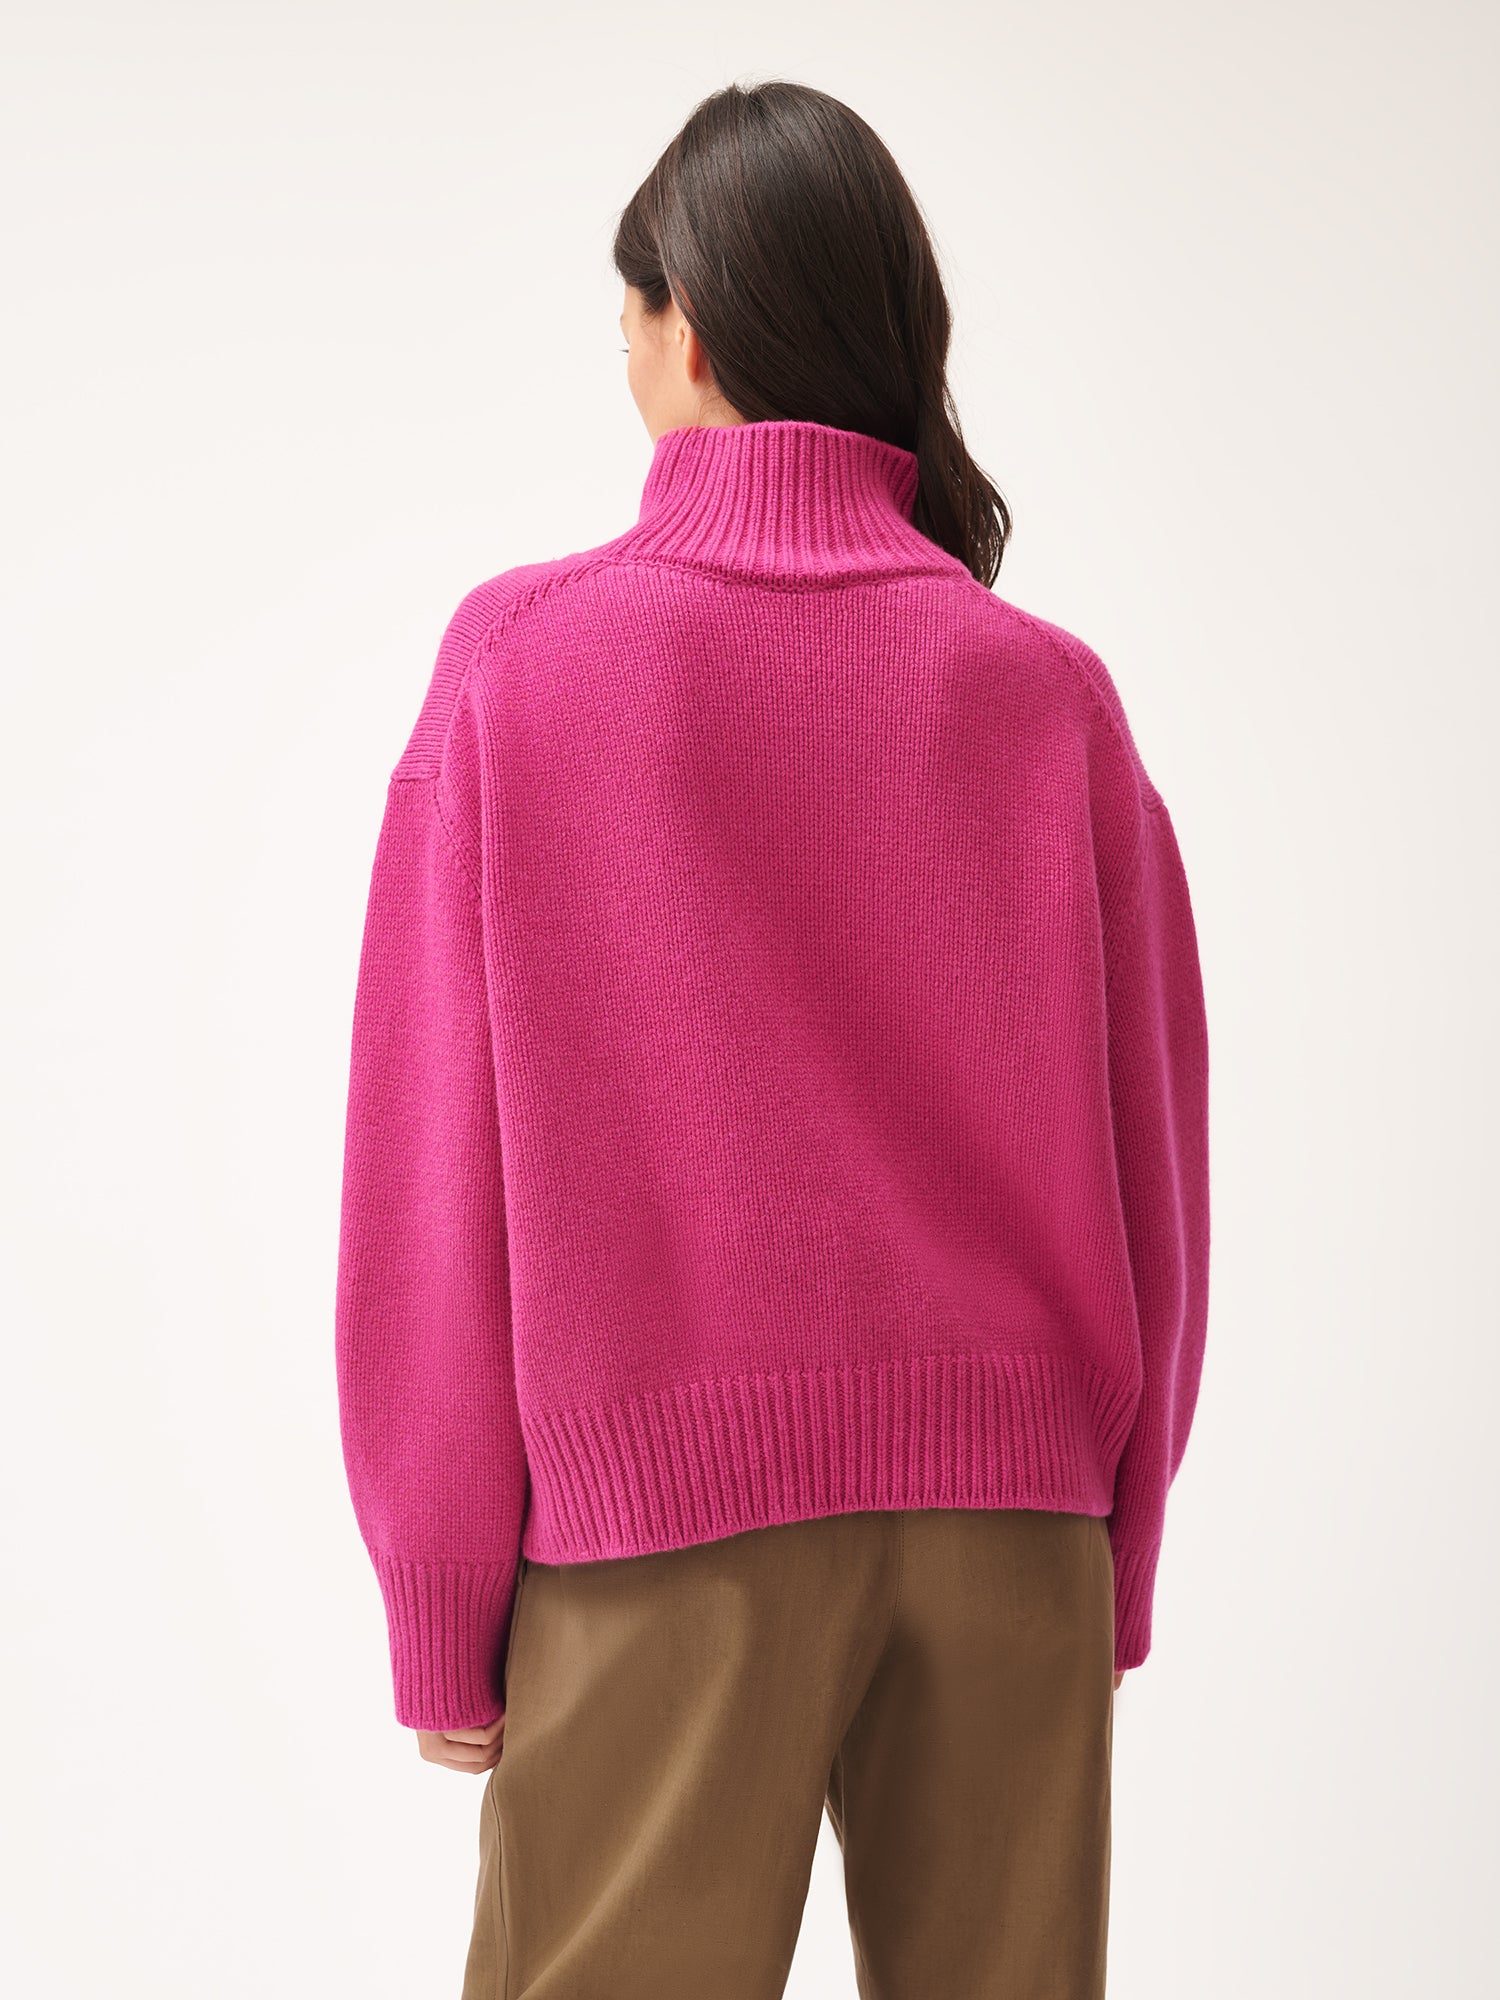 Womens_Recycled_Cashmere_Knit_Chunky_Turtleneck_Sweater_Tourmaline_Pink-female-2